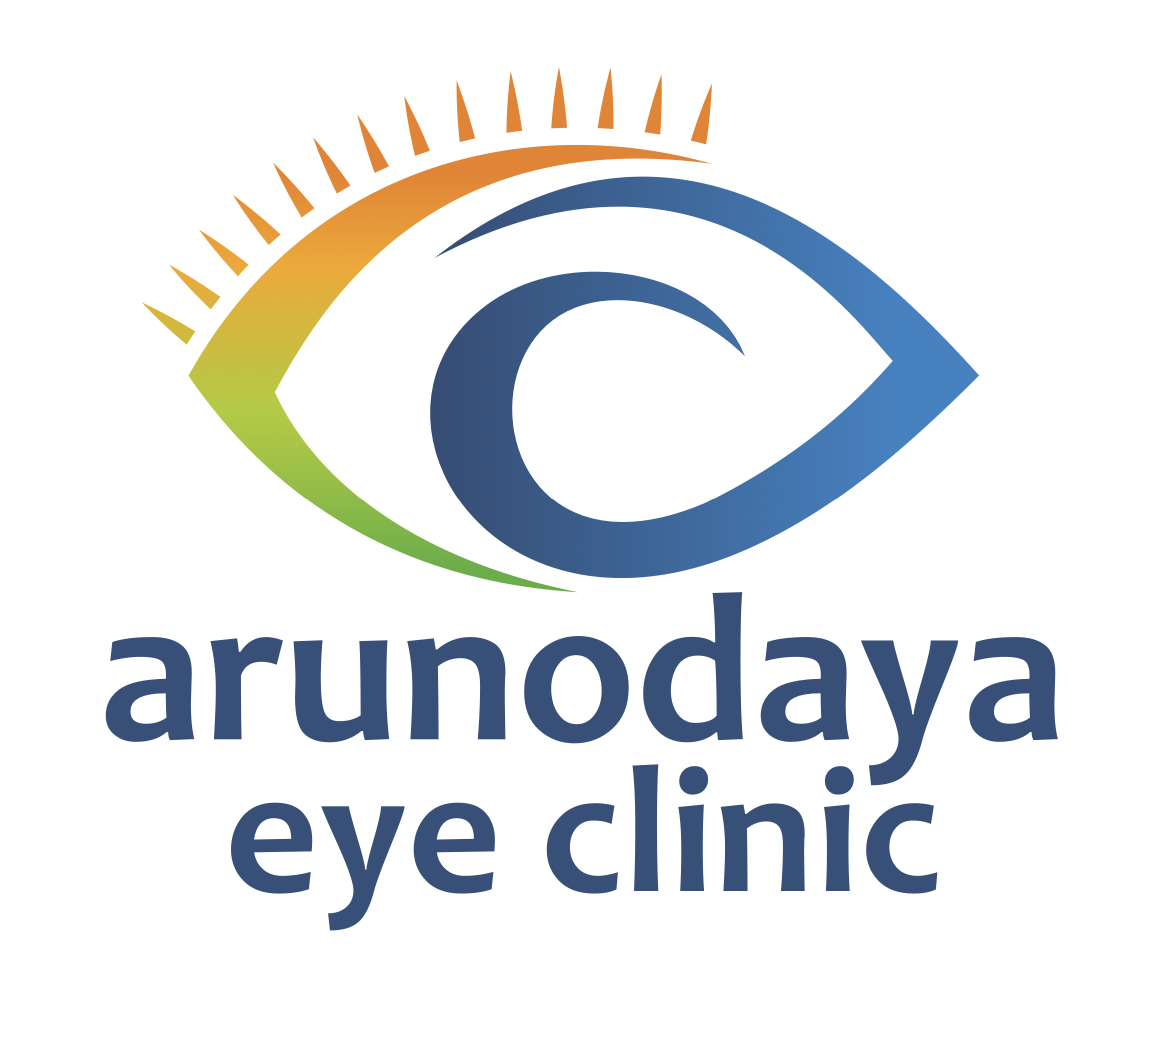 Arunodaya Eye Clinic is the best eye care clinic and surgical centre in Pimpri Chinchwad near wakad Pune